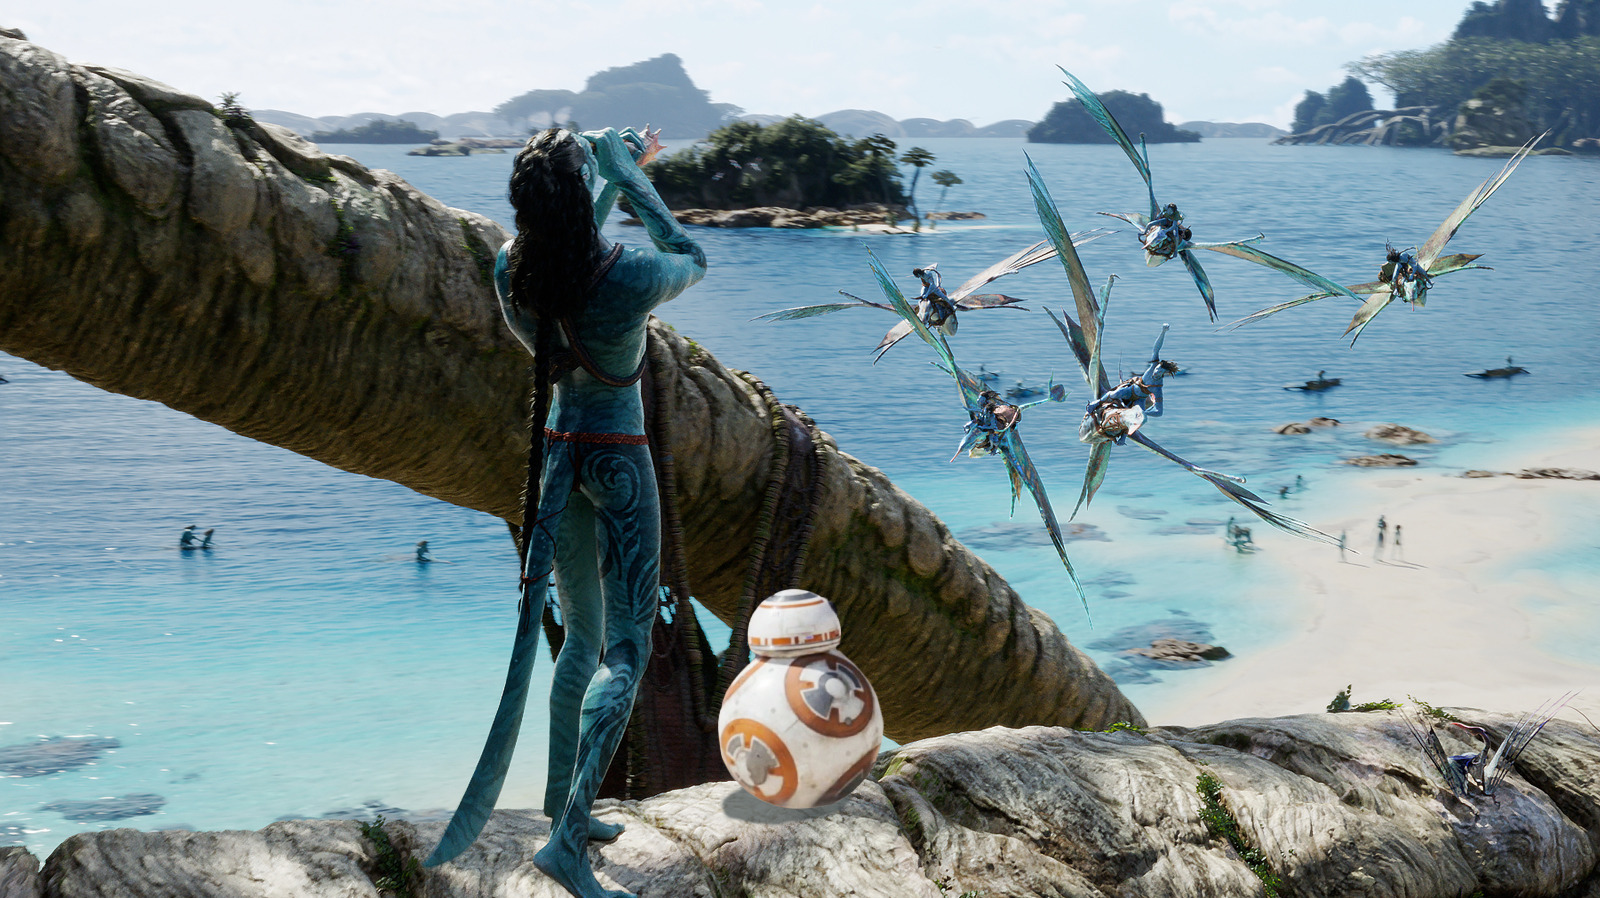 Avatar: The Way Of Water Rises Past Star Wars: The Force Awakens Becomes The Fourth Greatest Movie Of All Time